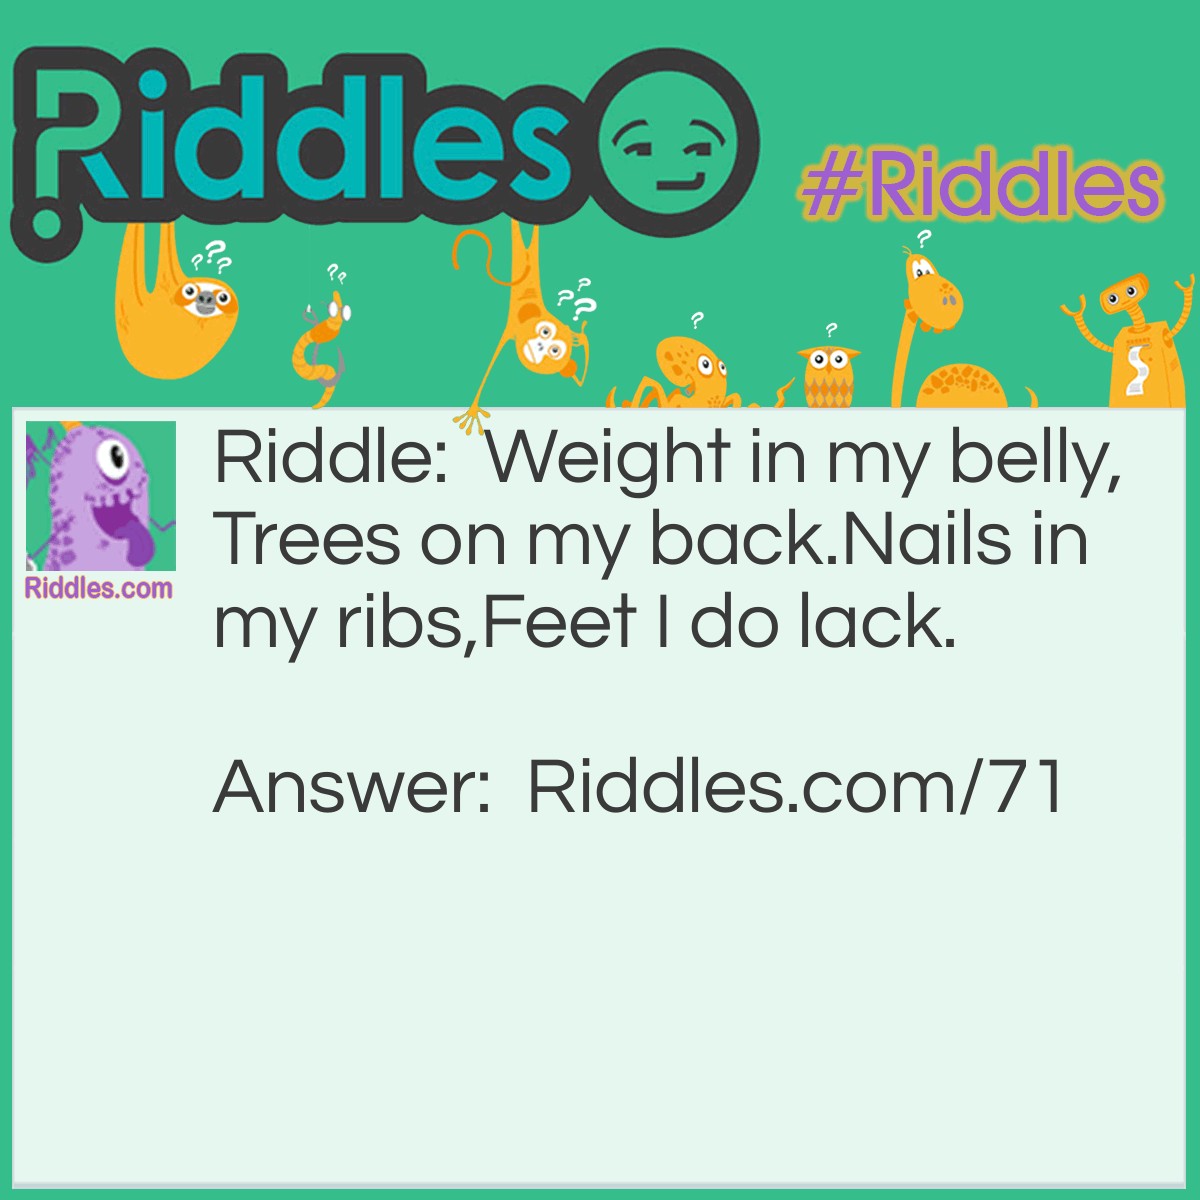 Riddle: Weight in my belly, Trees on my back. Nails in my ribs, Feet I do lack. What am I? Answer: I am a ship.